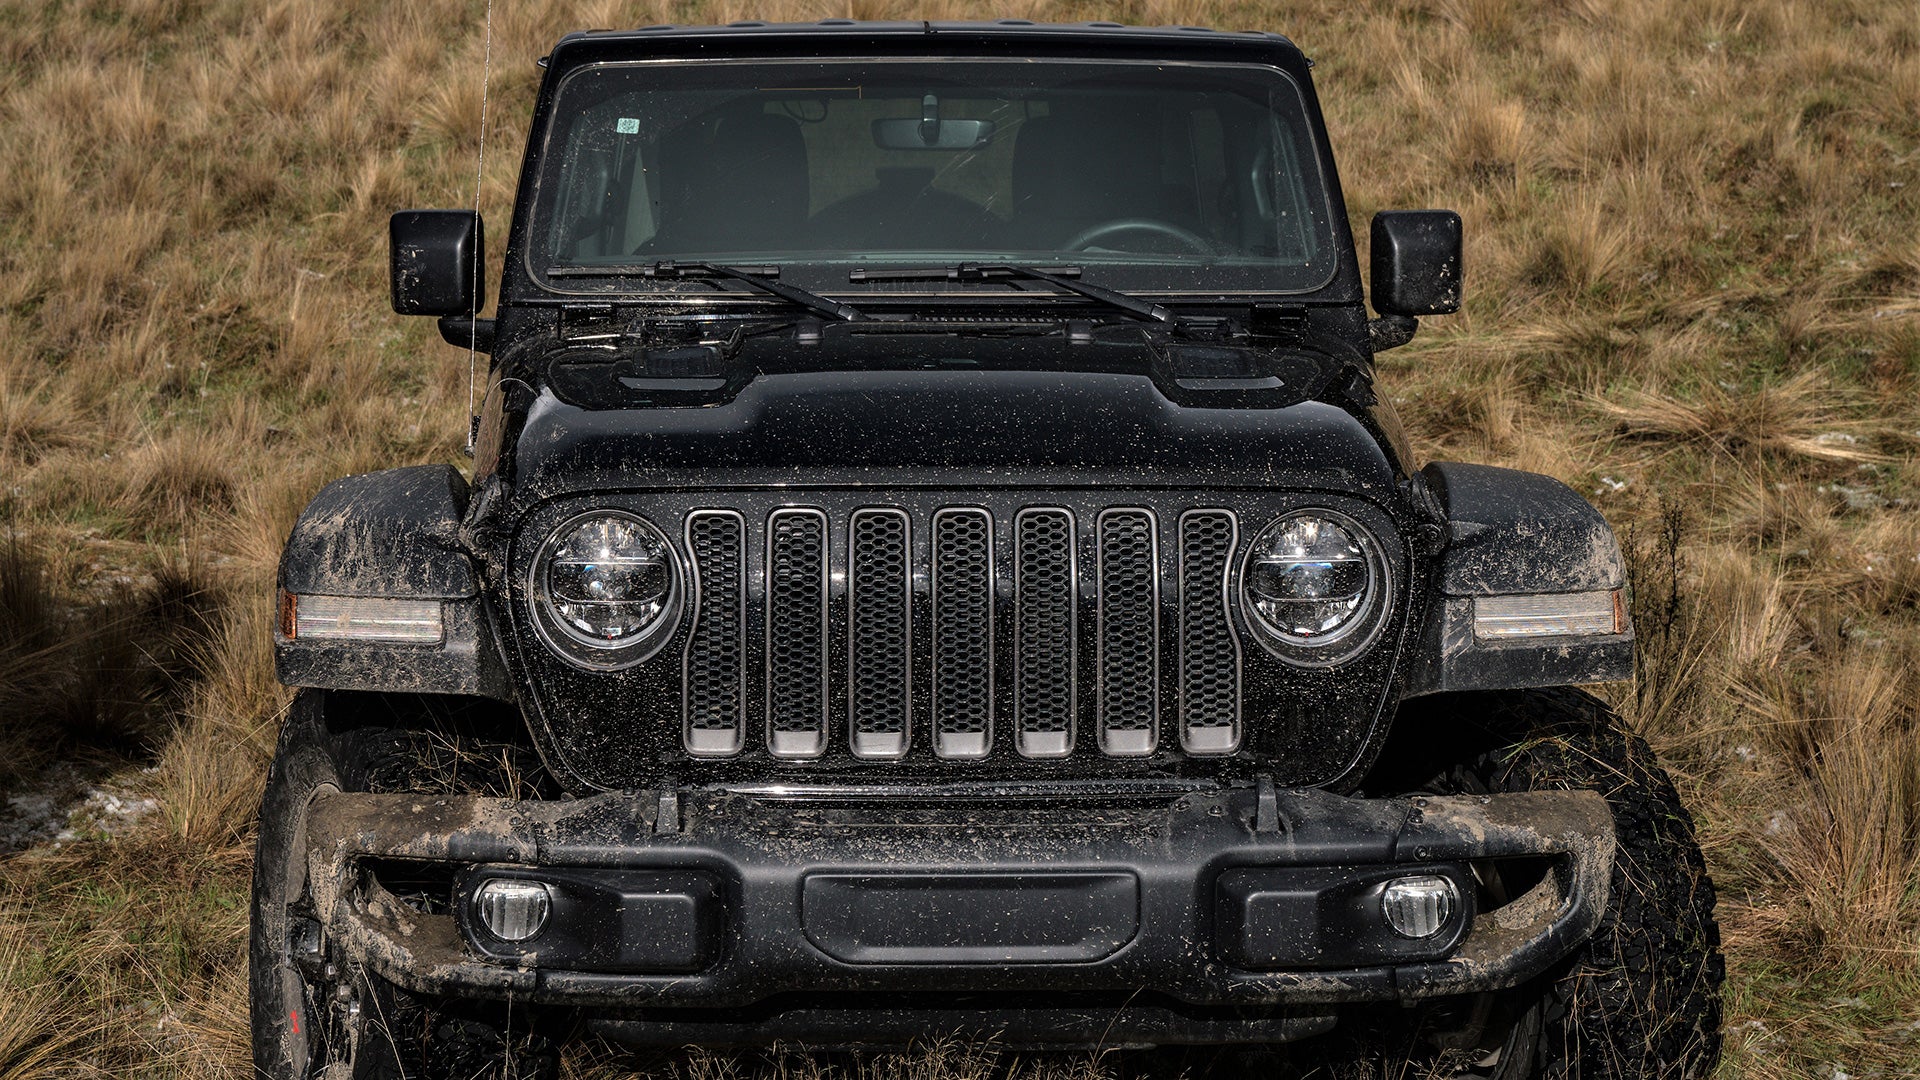 2018 Jeep Wrangler First Drive Review: All-New Wrangler Sets the Standard,  Again